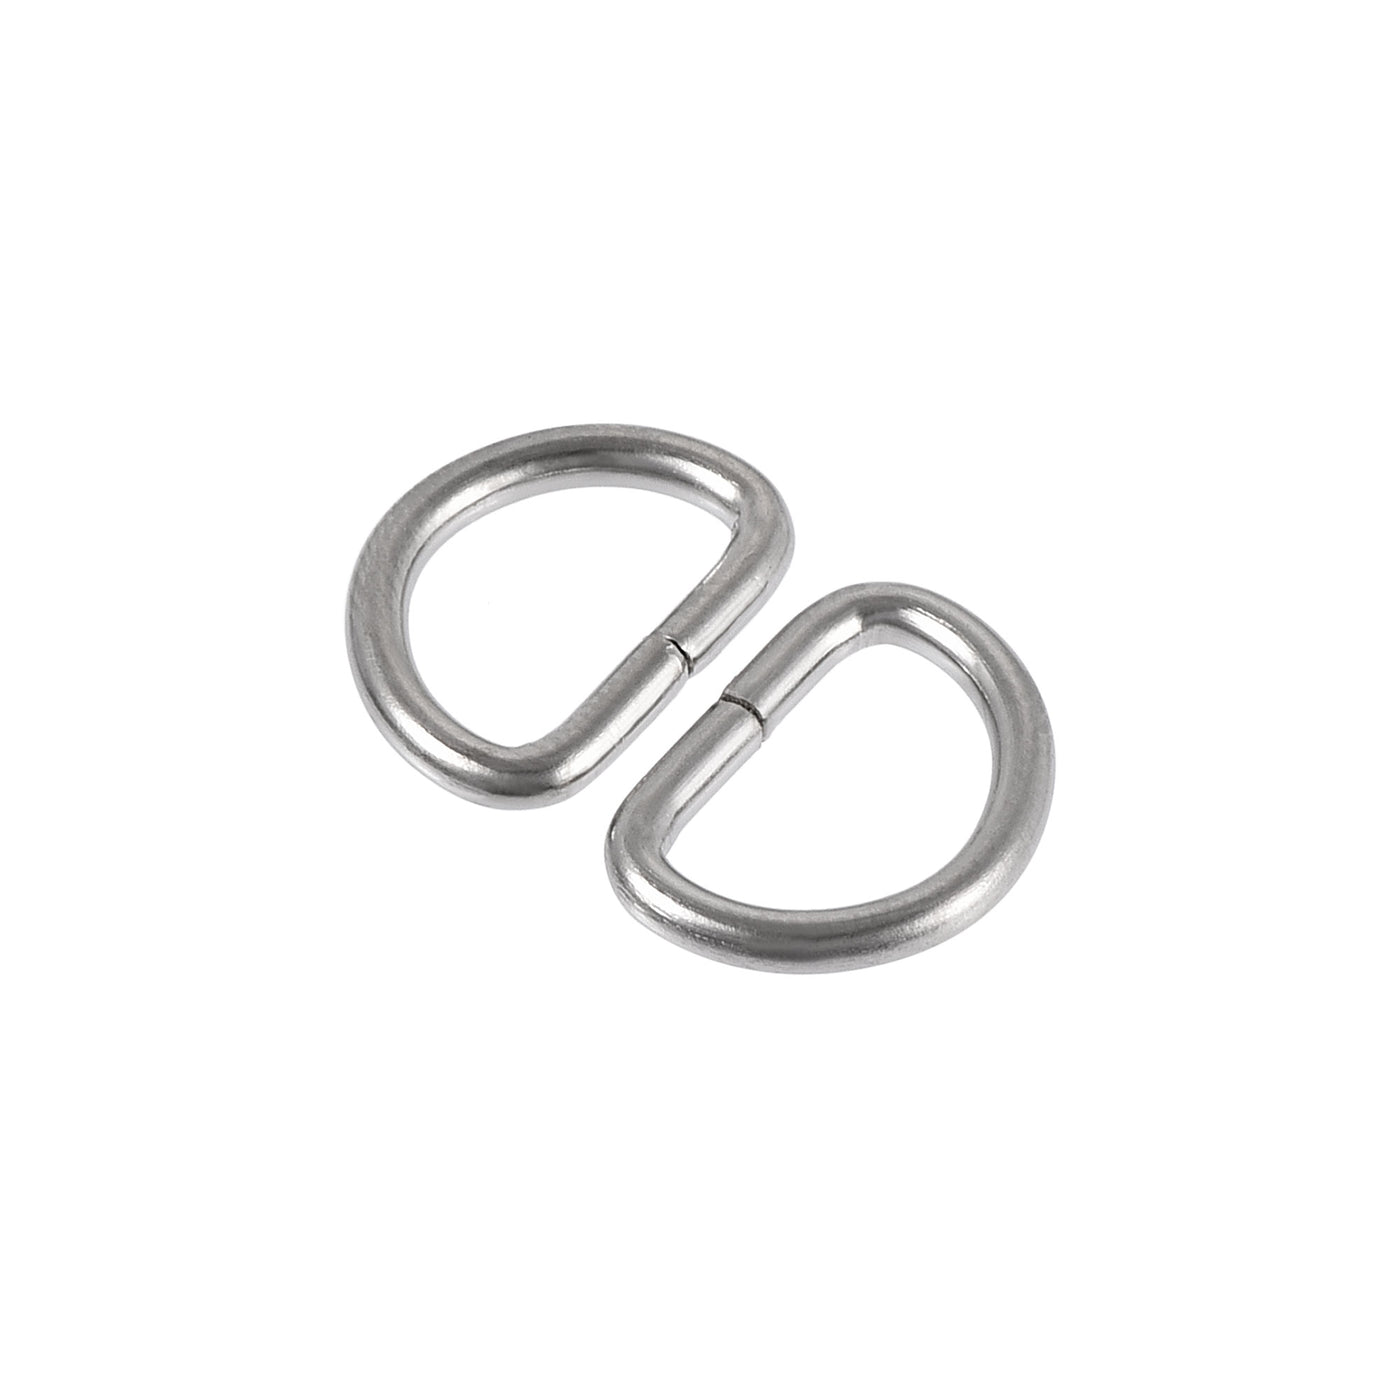 uxcell Uxcell Metal D Ring 0.39"(10mm) D-Rings Buckle for Hardware Bags Belts Craft DIY Accessories Silver Tone 100pcs